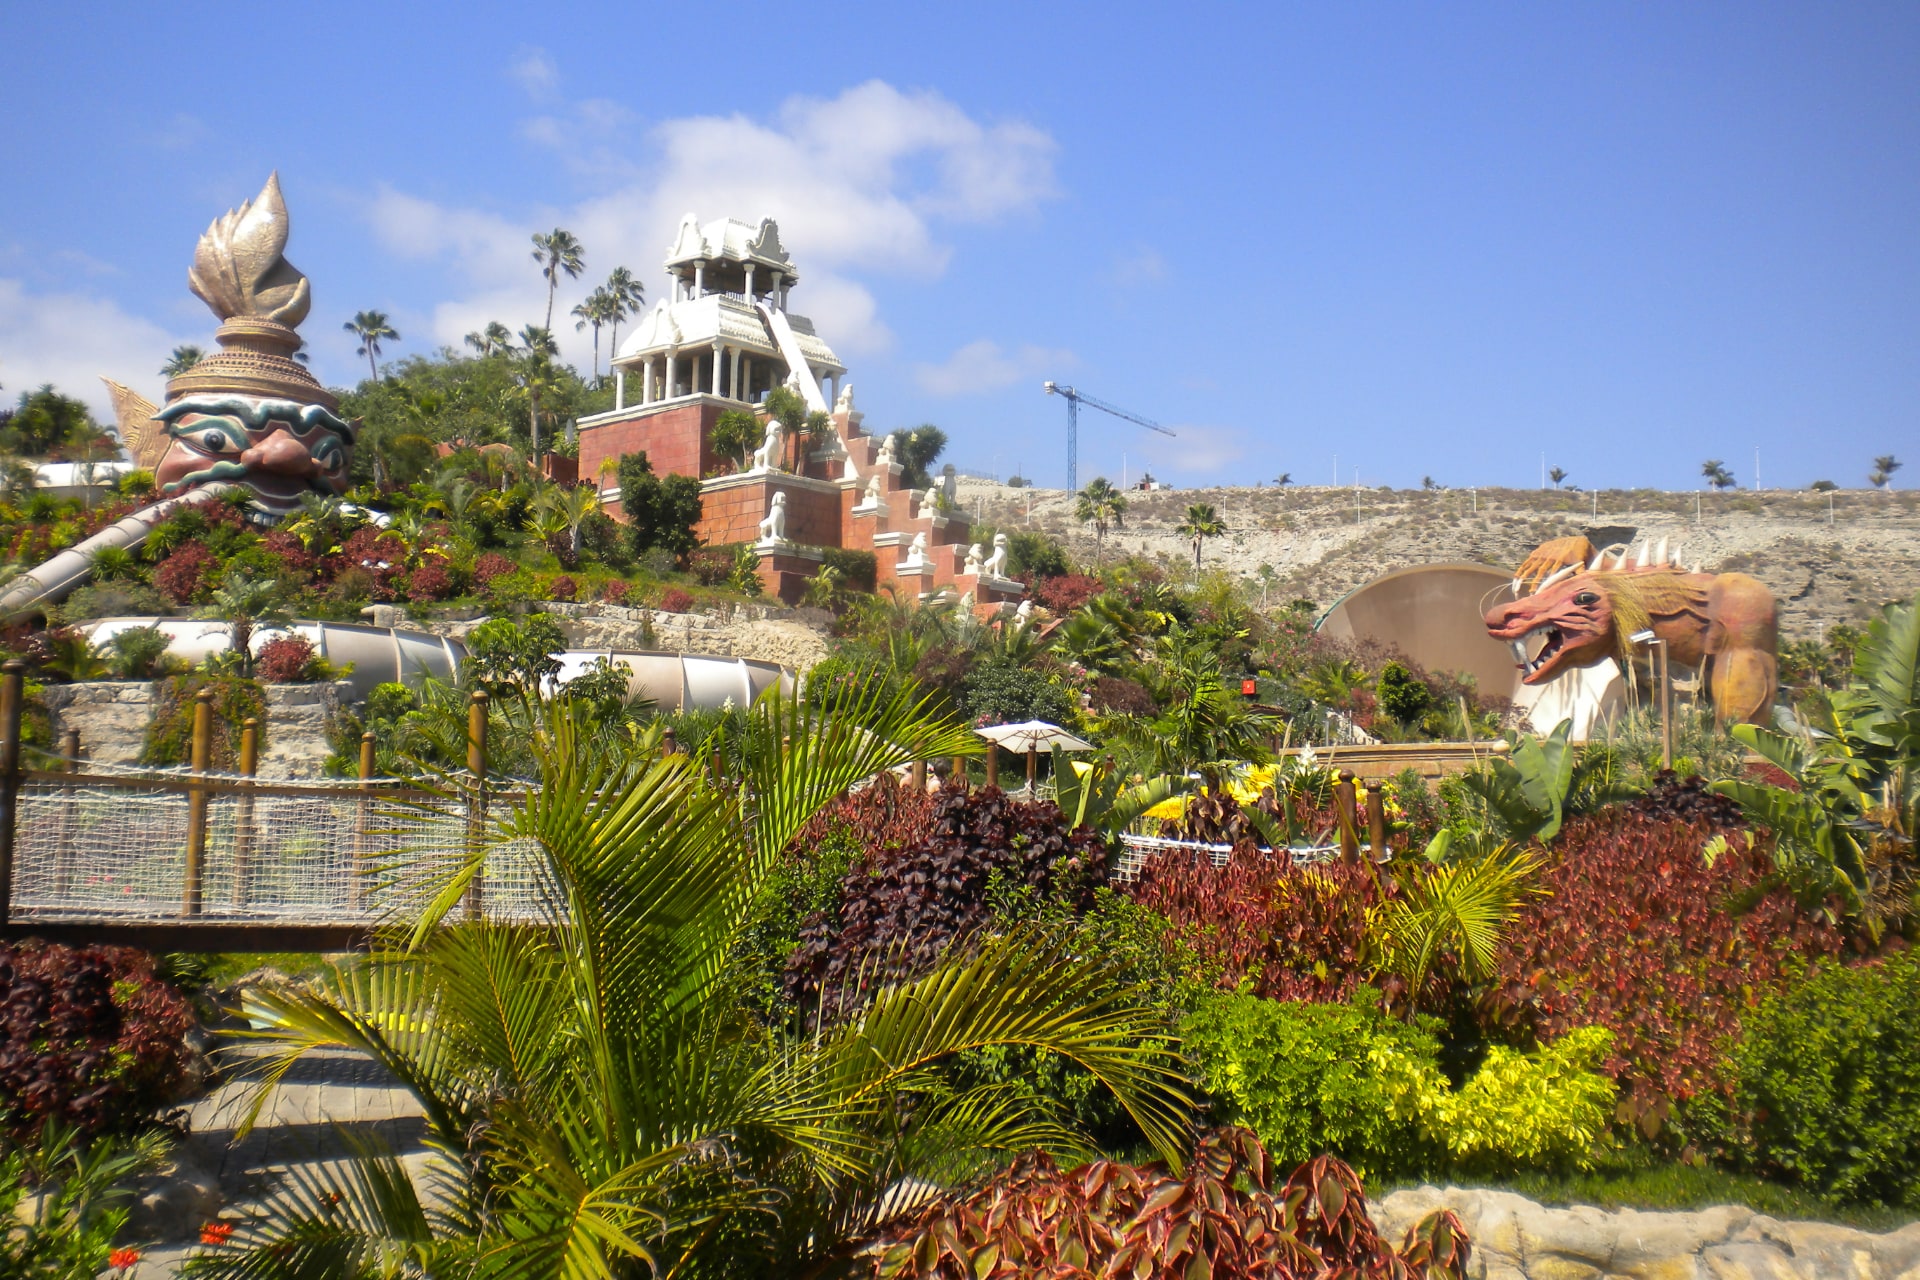 Panoramic view of Siam Park, Tenerife, showcasing its diverse attractions and vibrant atmosphere